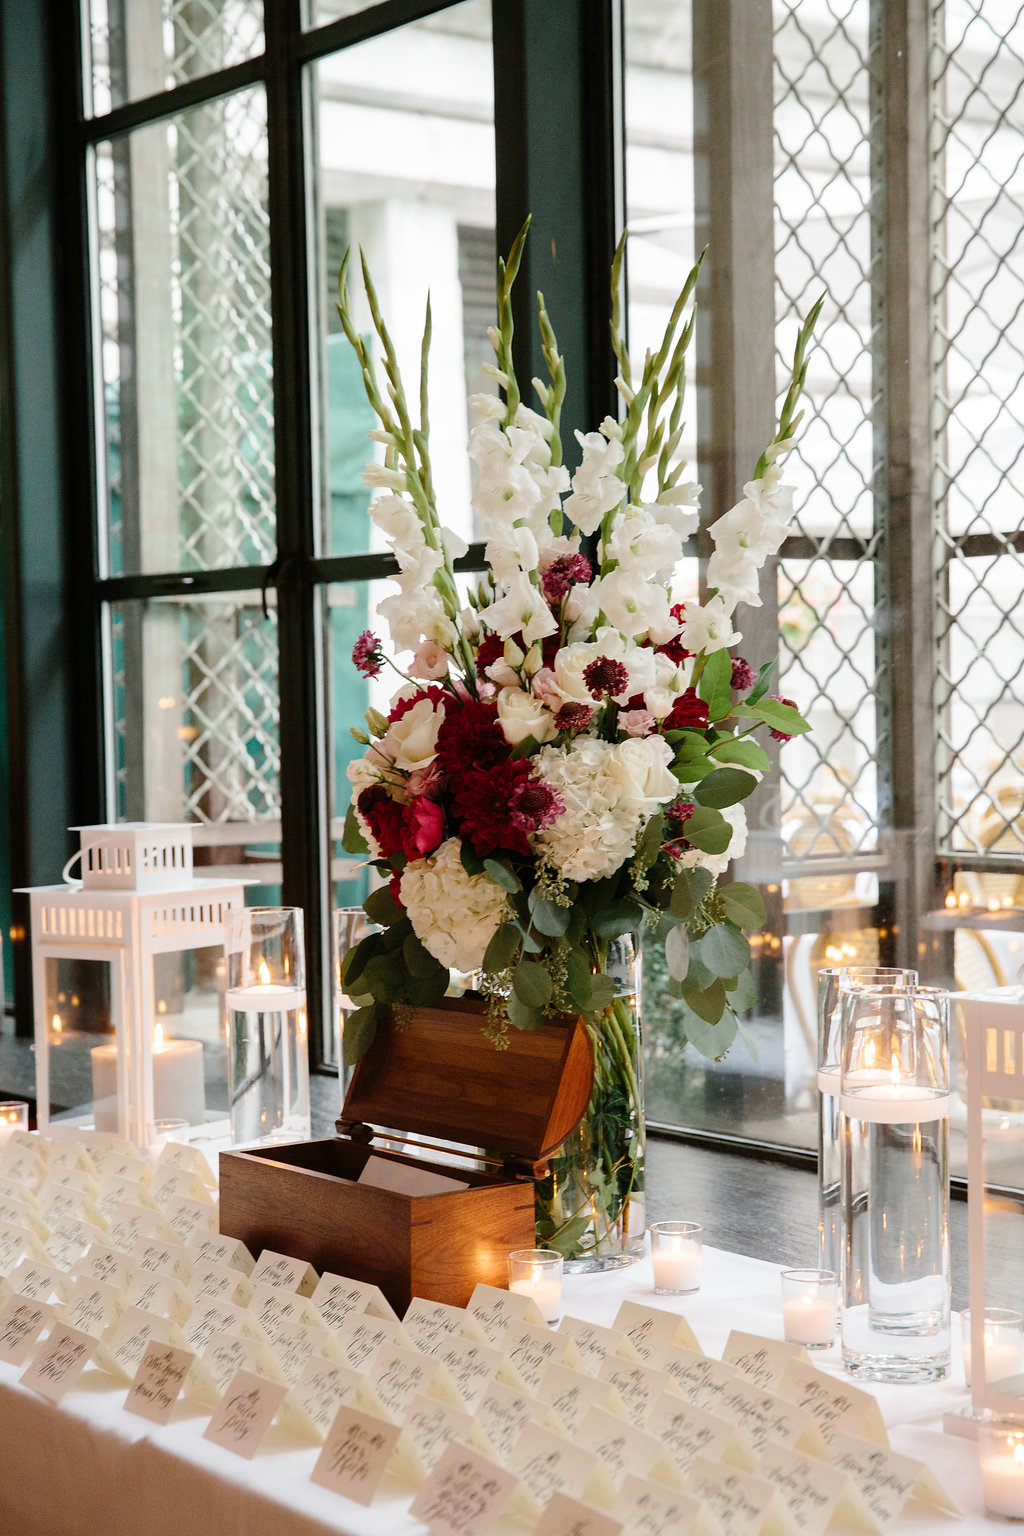  Photography:  Vik Photography   Planning:  Dawn Mauberret Events   Venue:  Bryant Park Grill  